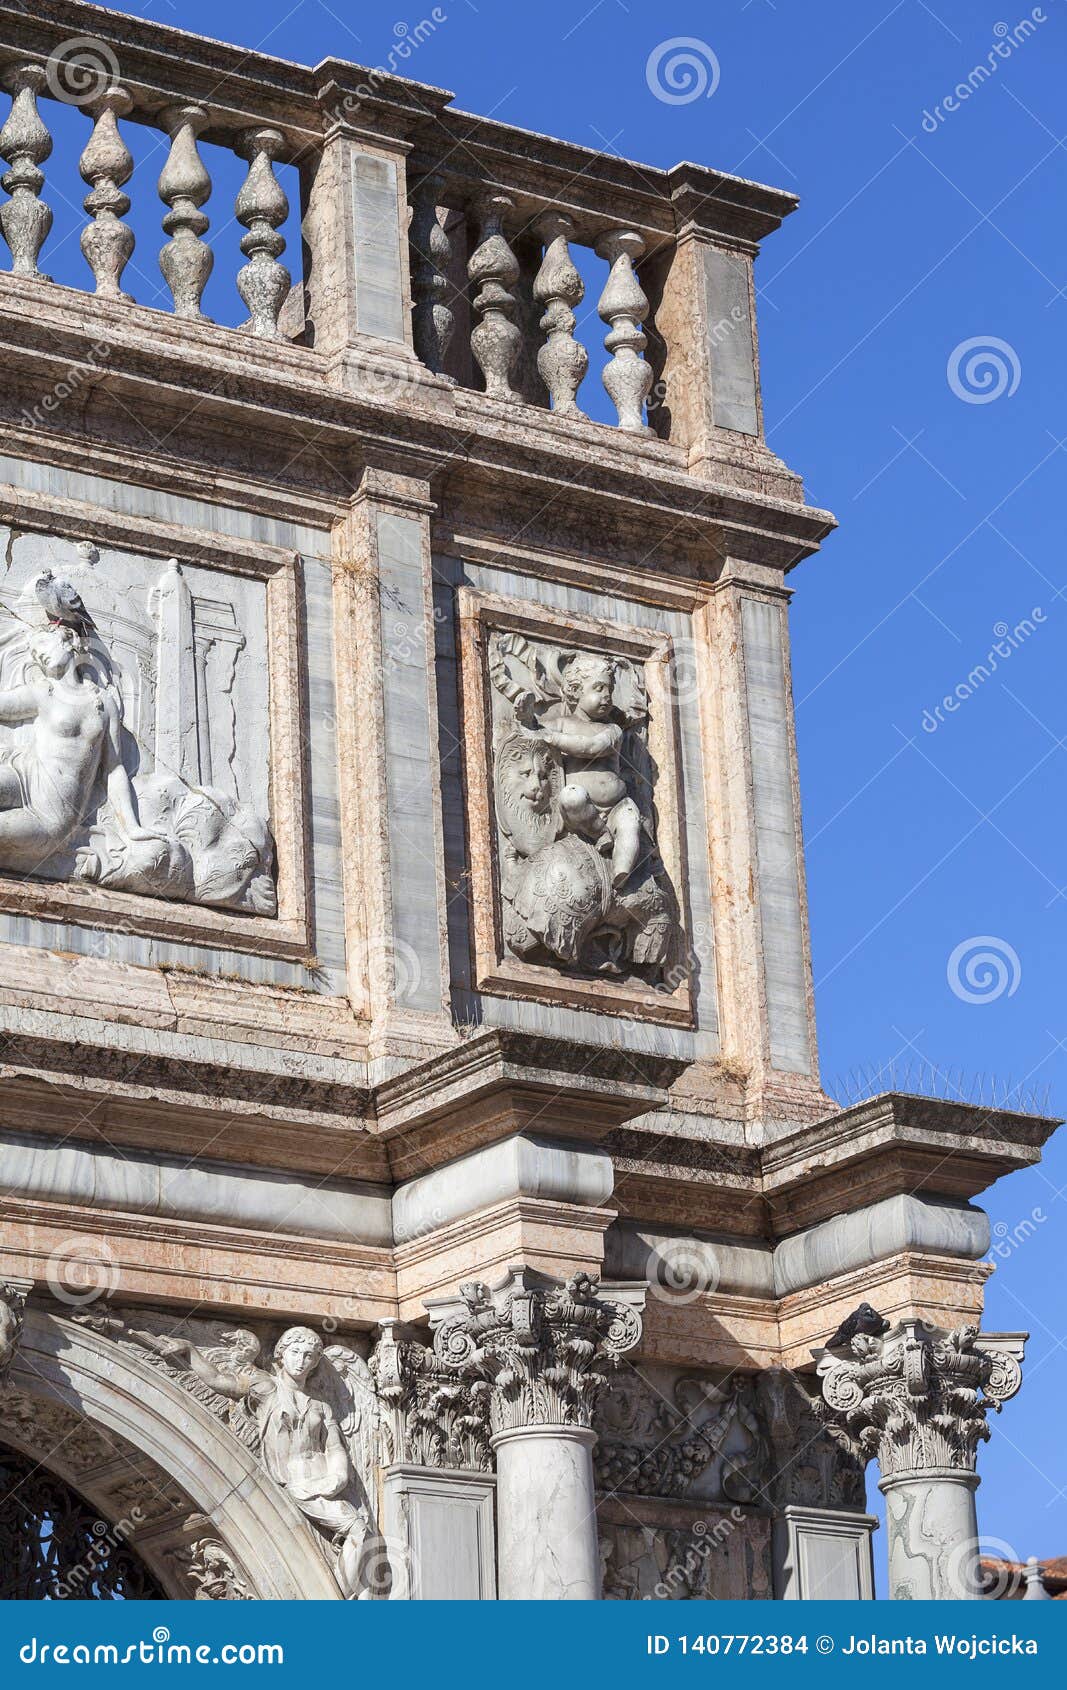 Photographic Print: Detail of St. Marks Basilica, Piazza 